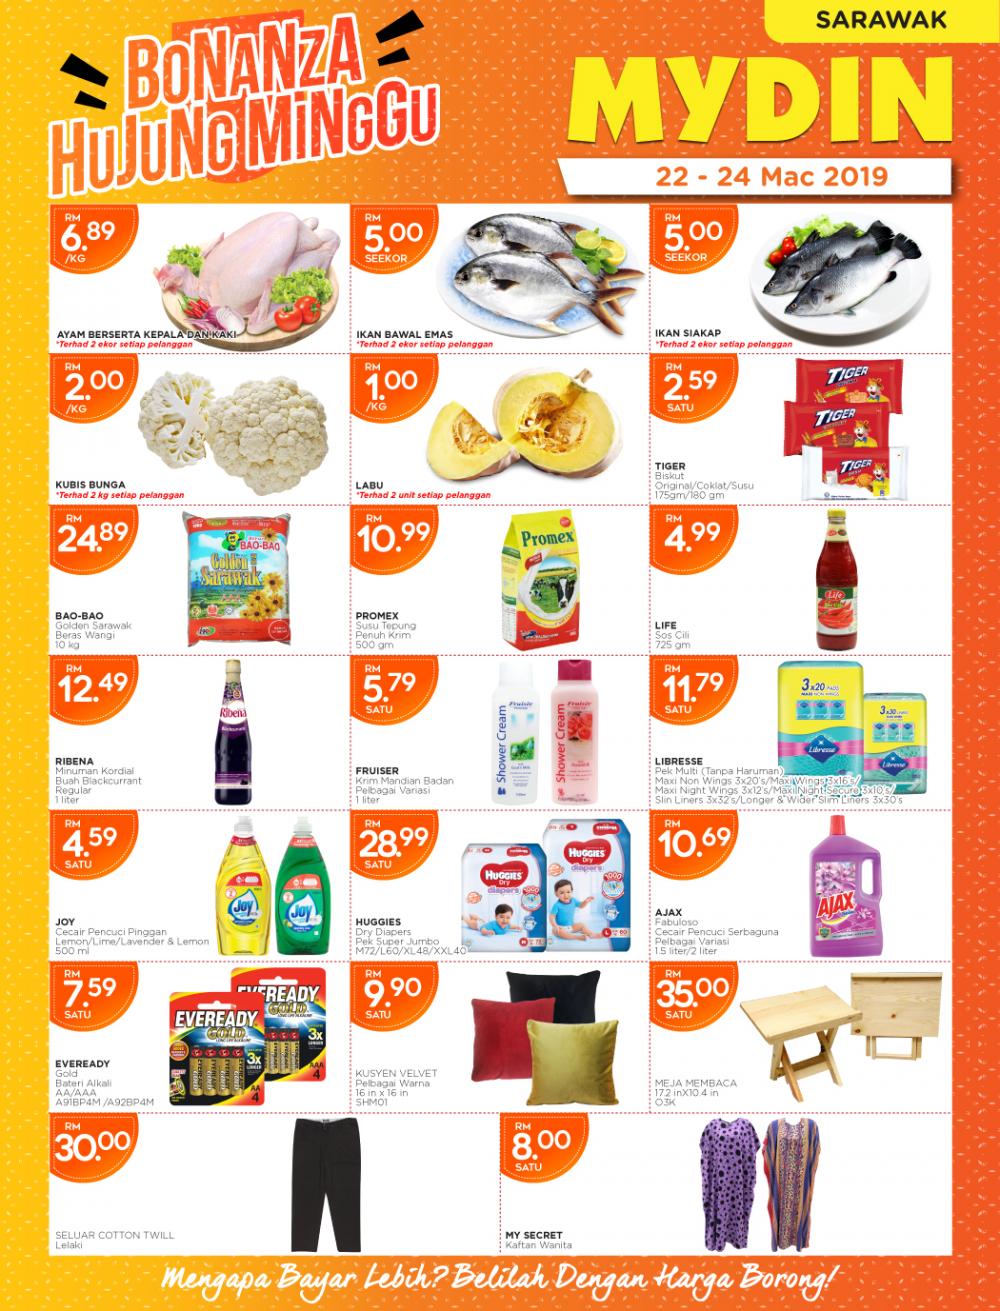 MYDIN Weekend Promotion at Sarawak (22 March 2019 - 24 March 2019)